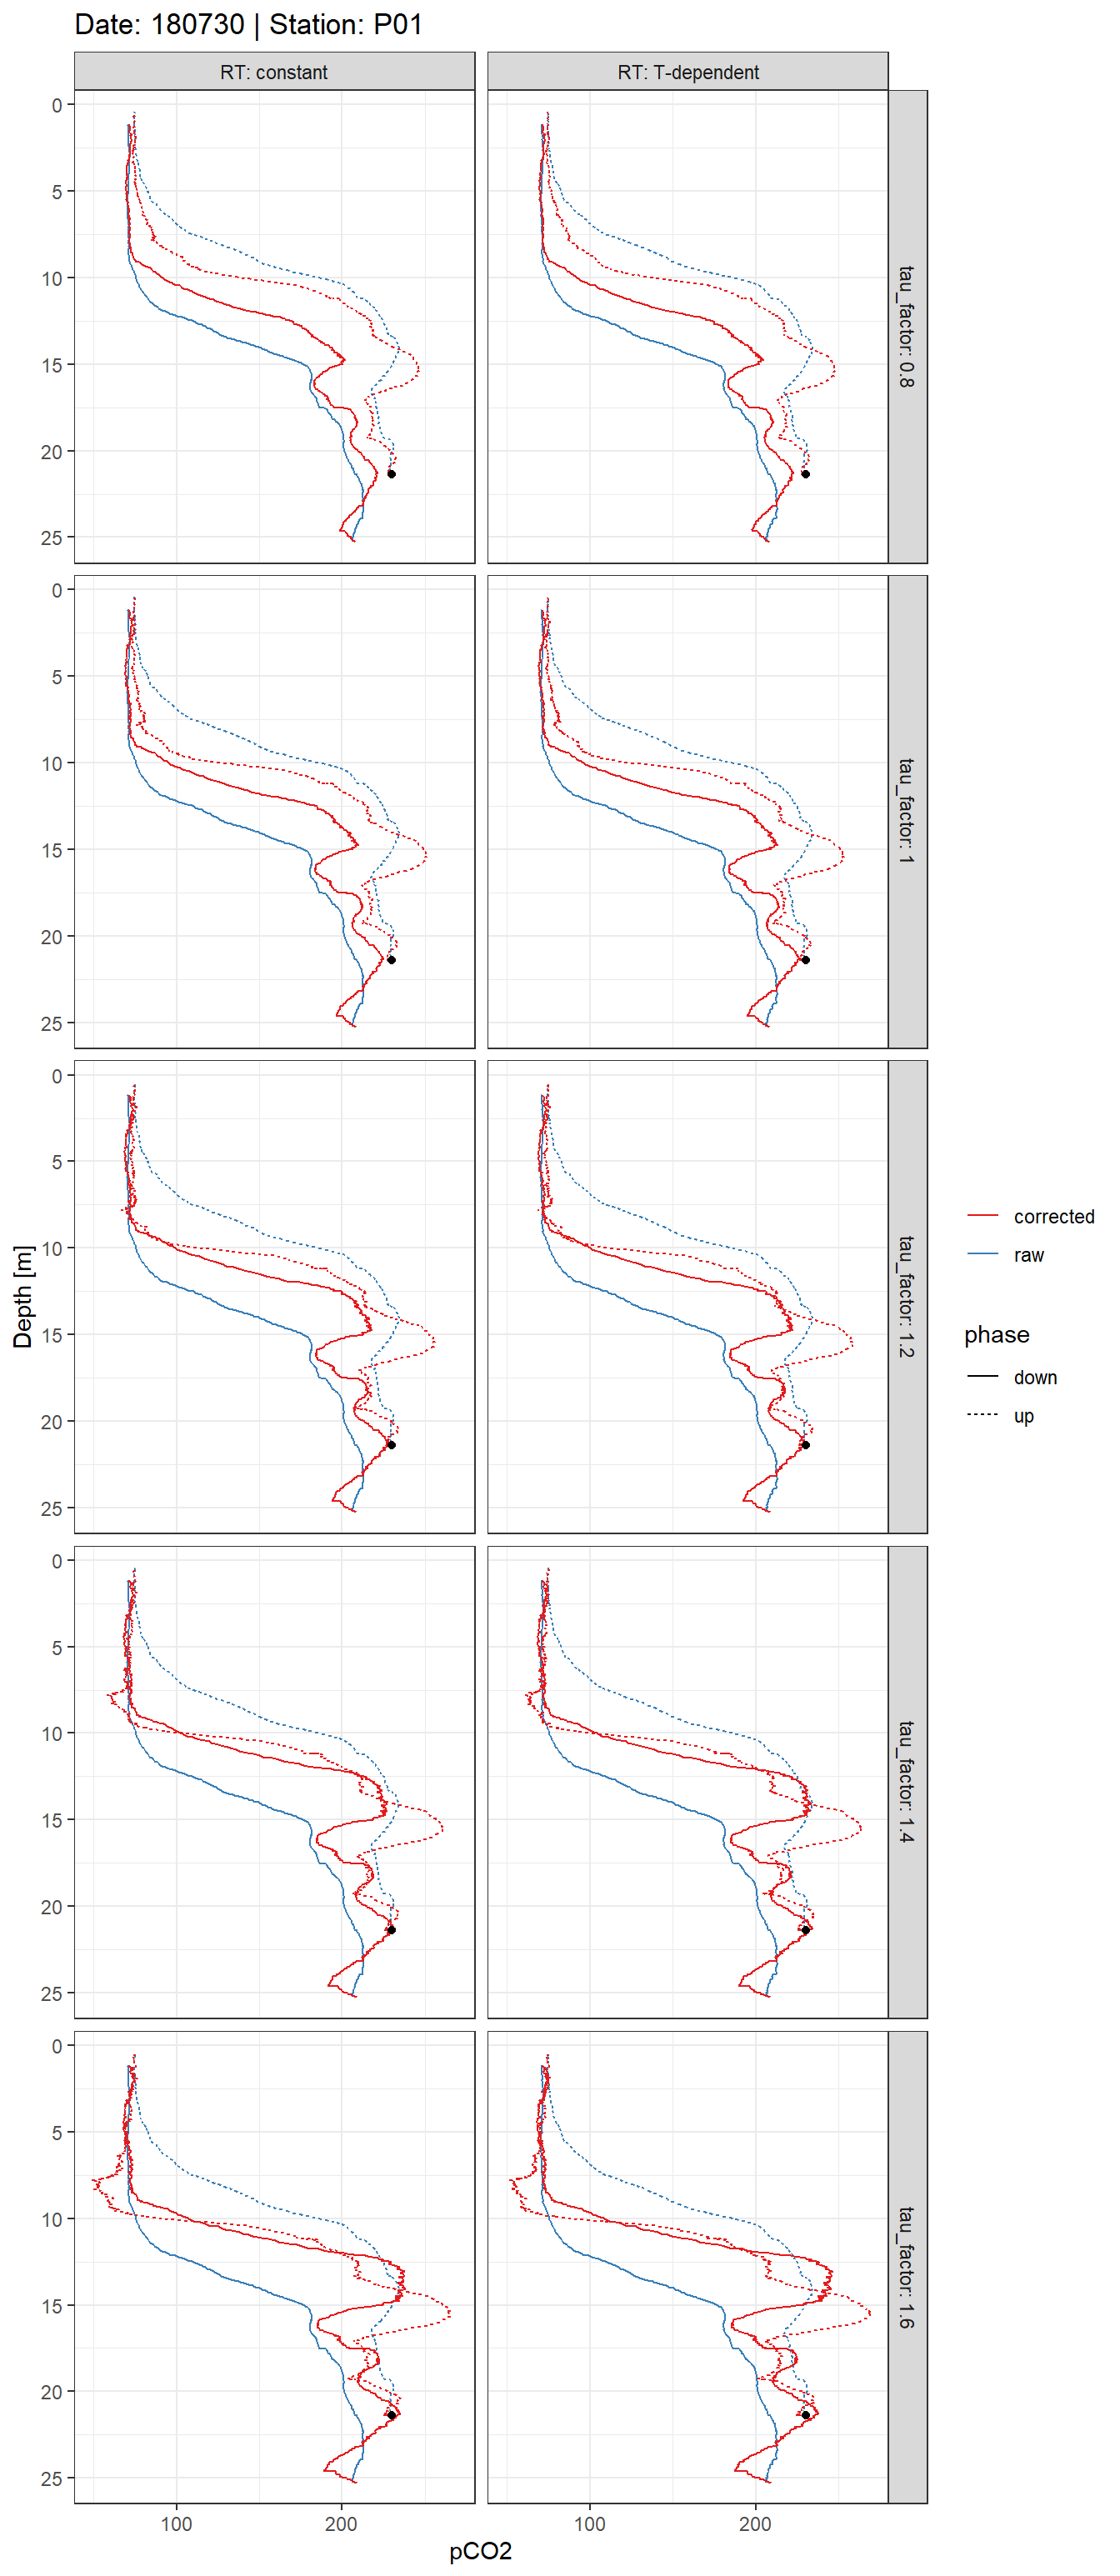 Example plot of response time corrected and raw pCO~2~ profiles. Panels highlight the effect of constant vs T-dependent tau estimates (columns) and the optimization by applying a constant factor (rows).